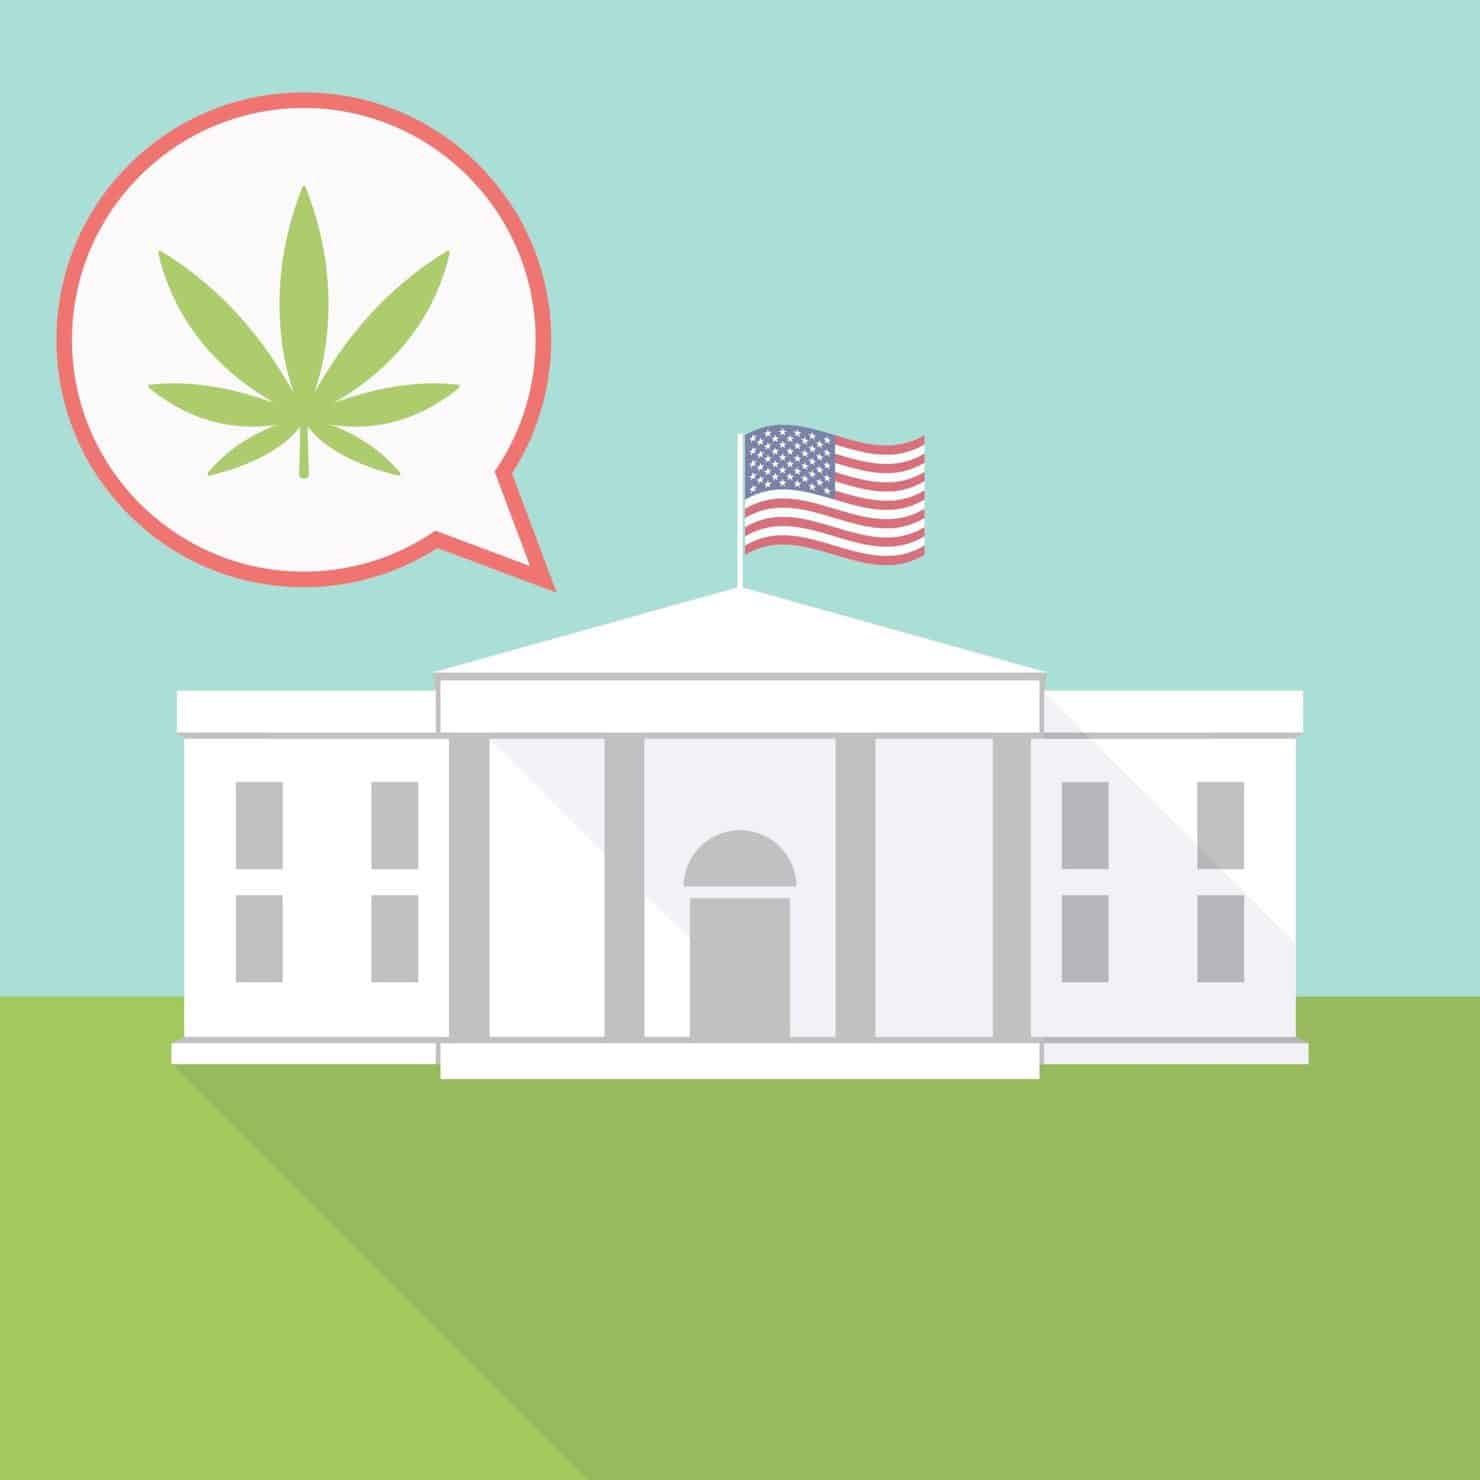 Is This Secret Trump Committee Planning To Undermine Legal Cannabis?